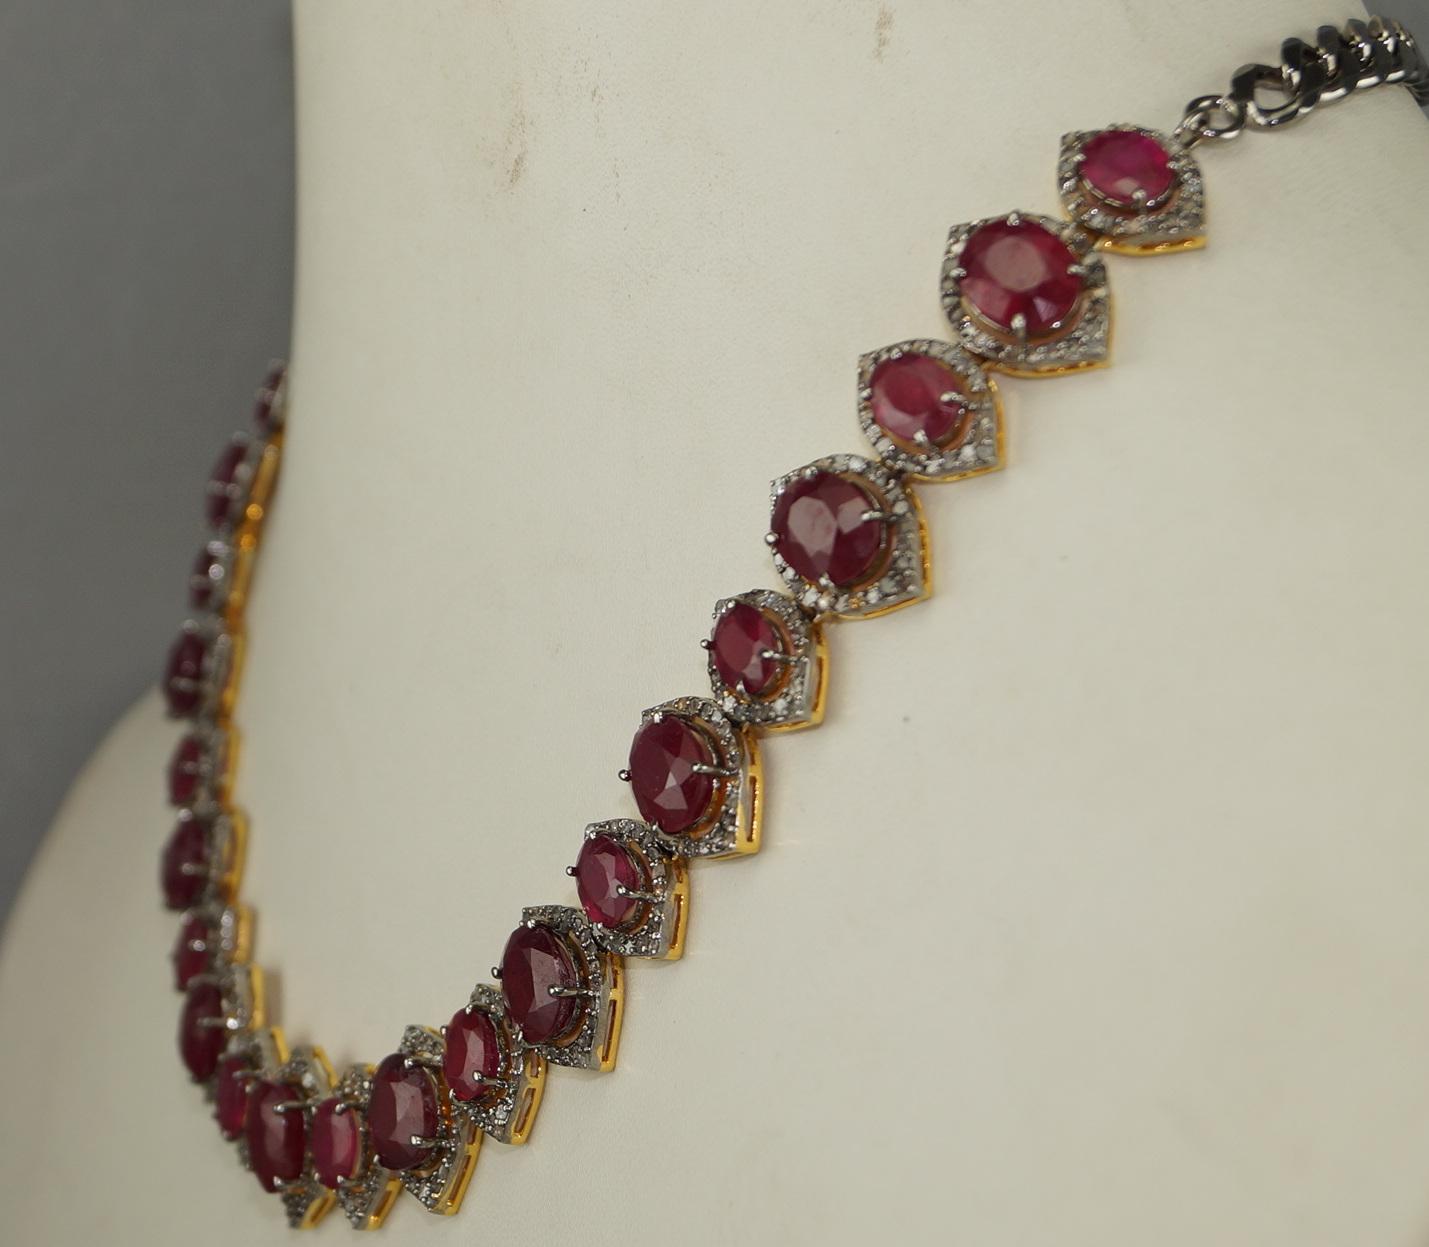 This stunner is made up of natural pave diamonds with lab grown red ruby gemtsone. The jewel has been crafted in sterling silver by fine artisans for the uniqueness of the jewel. Red is the color of love and so this necklace sure to make you symbol